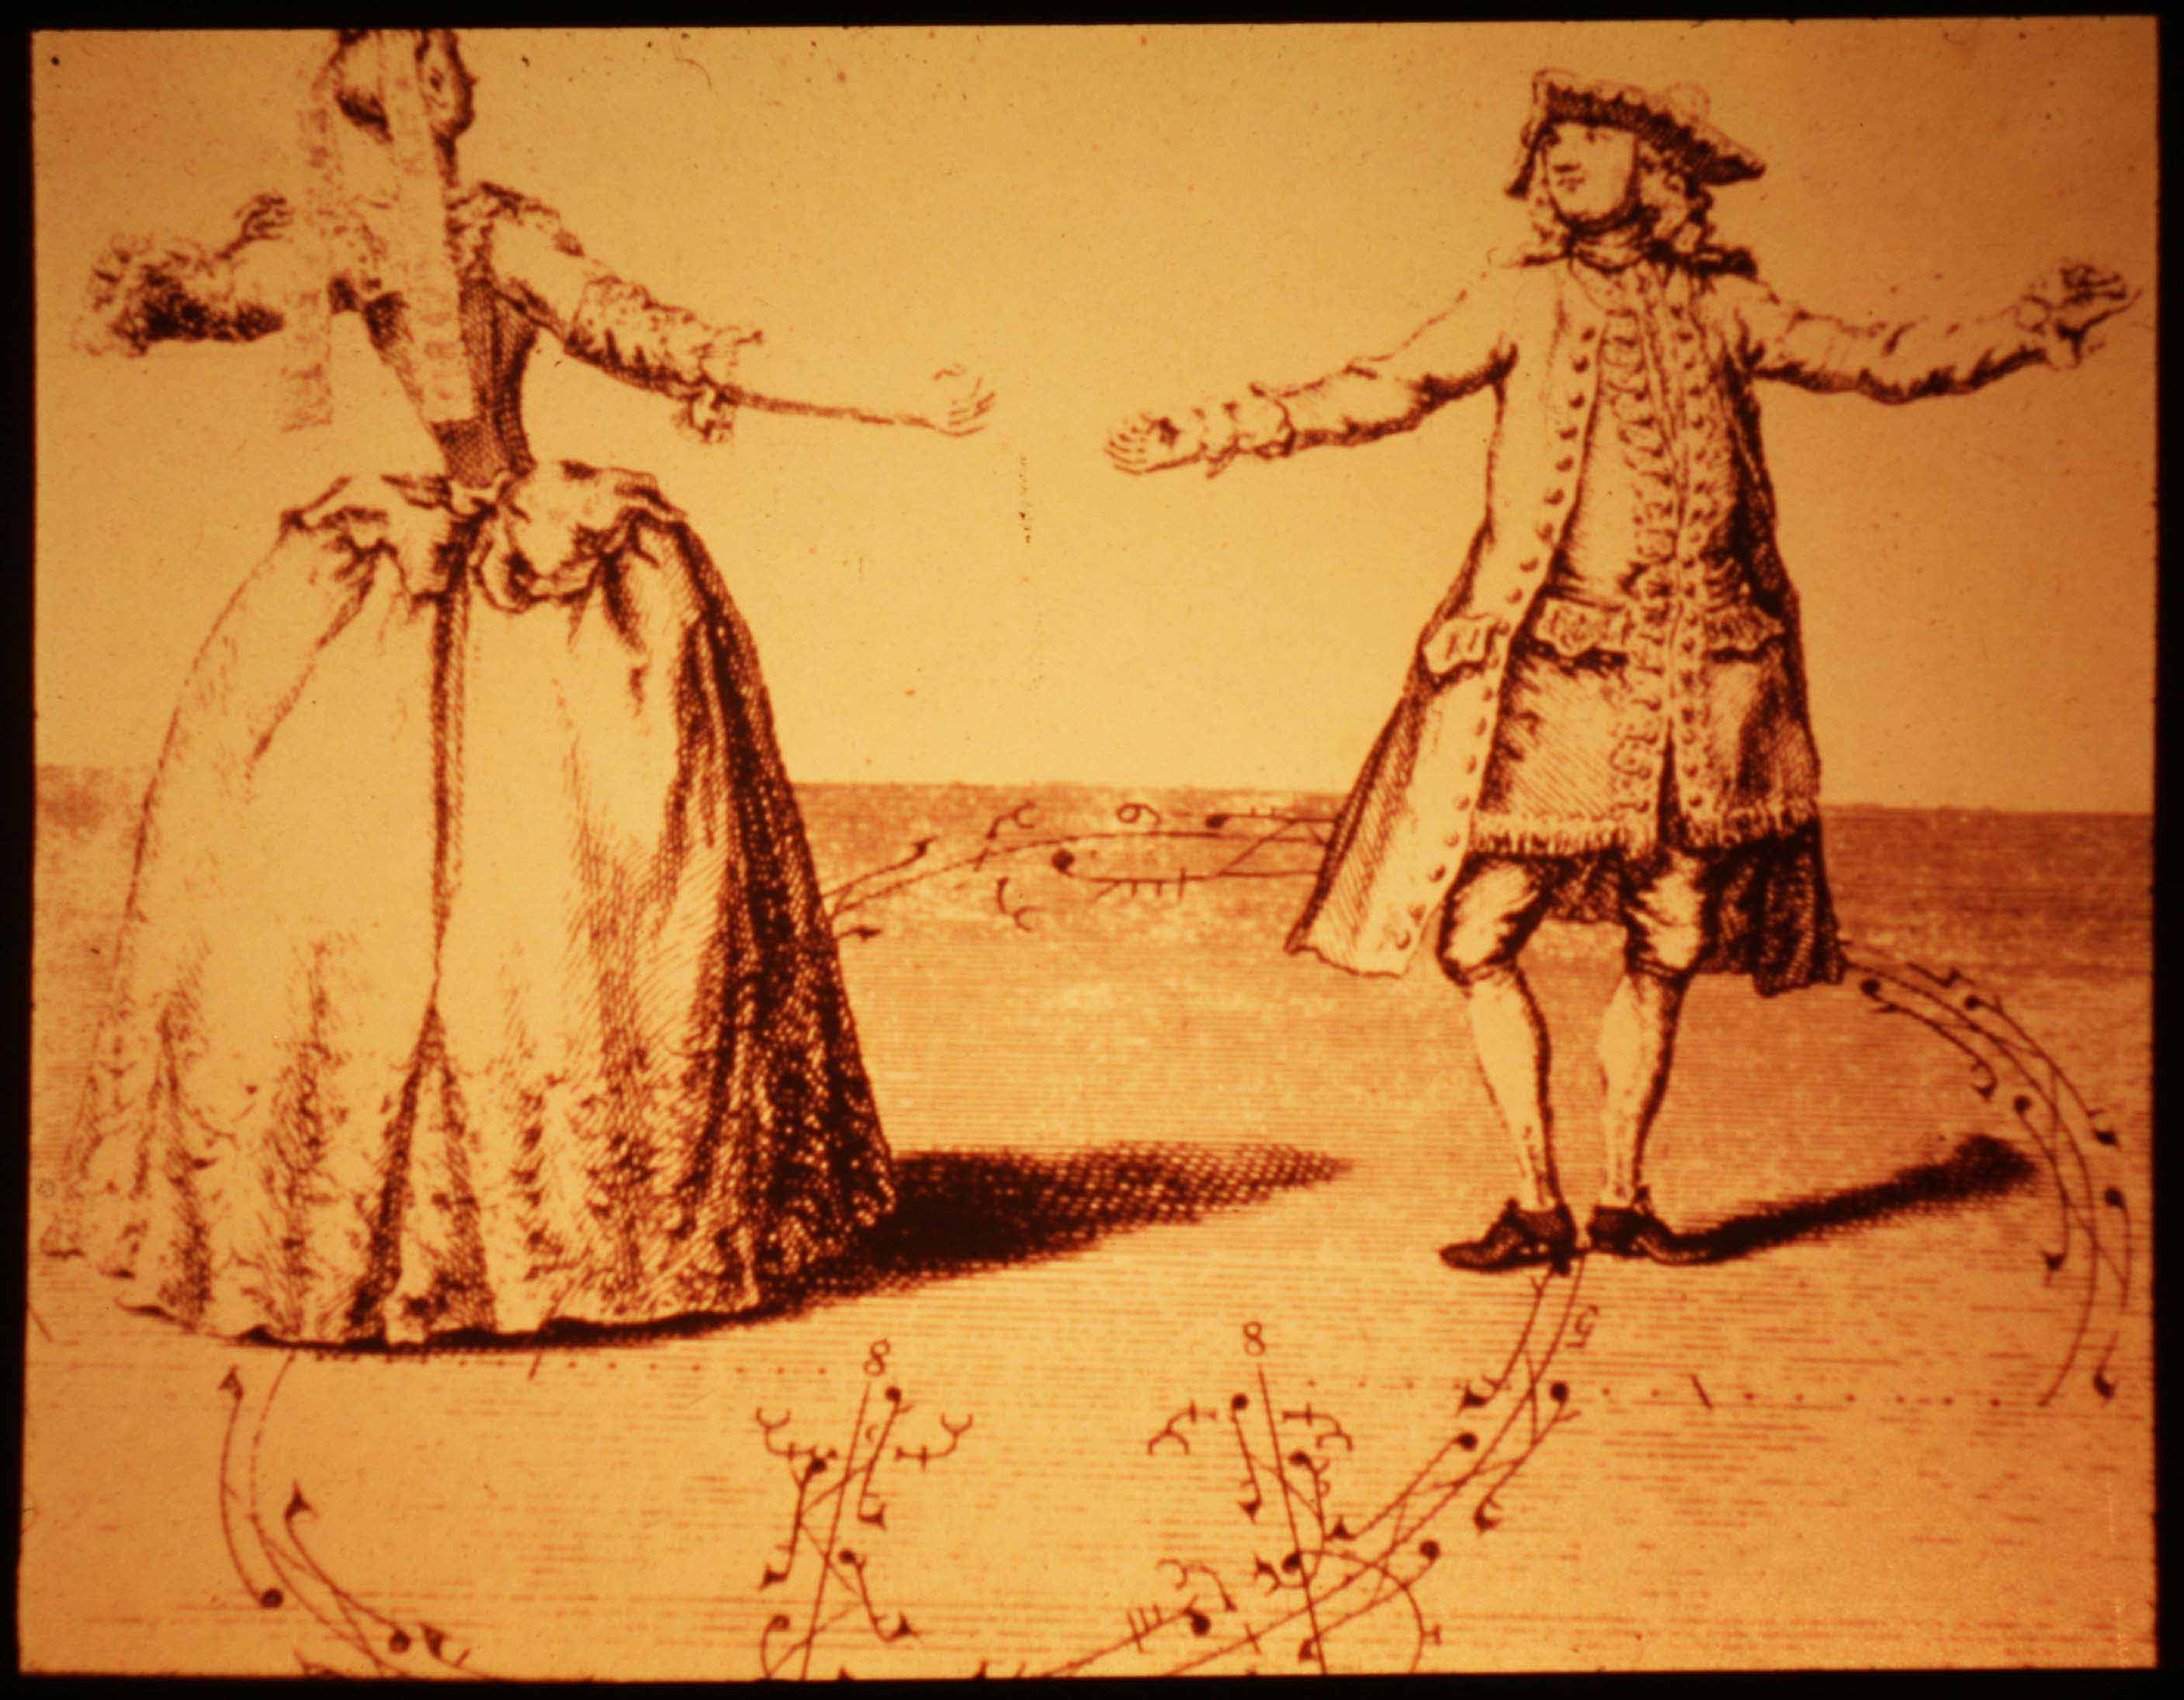 6- Presentation of both arms in the minuet